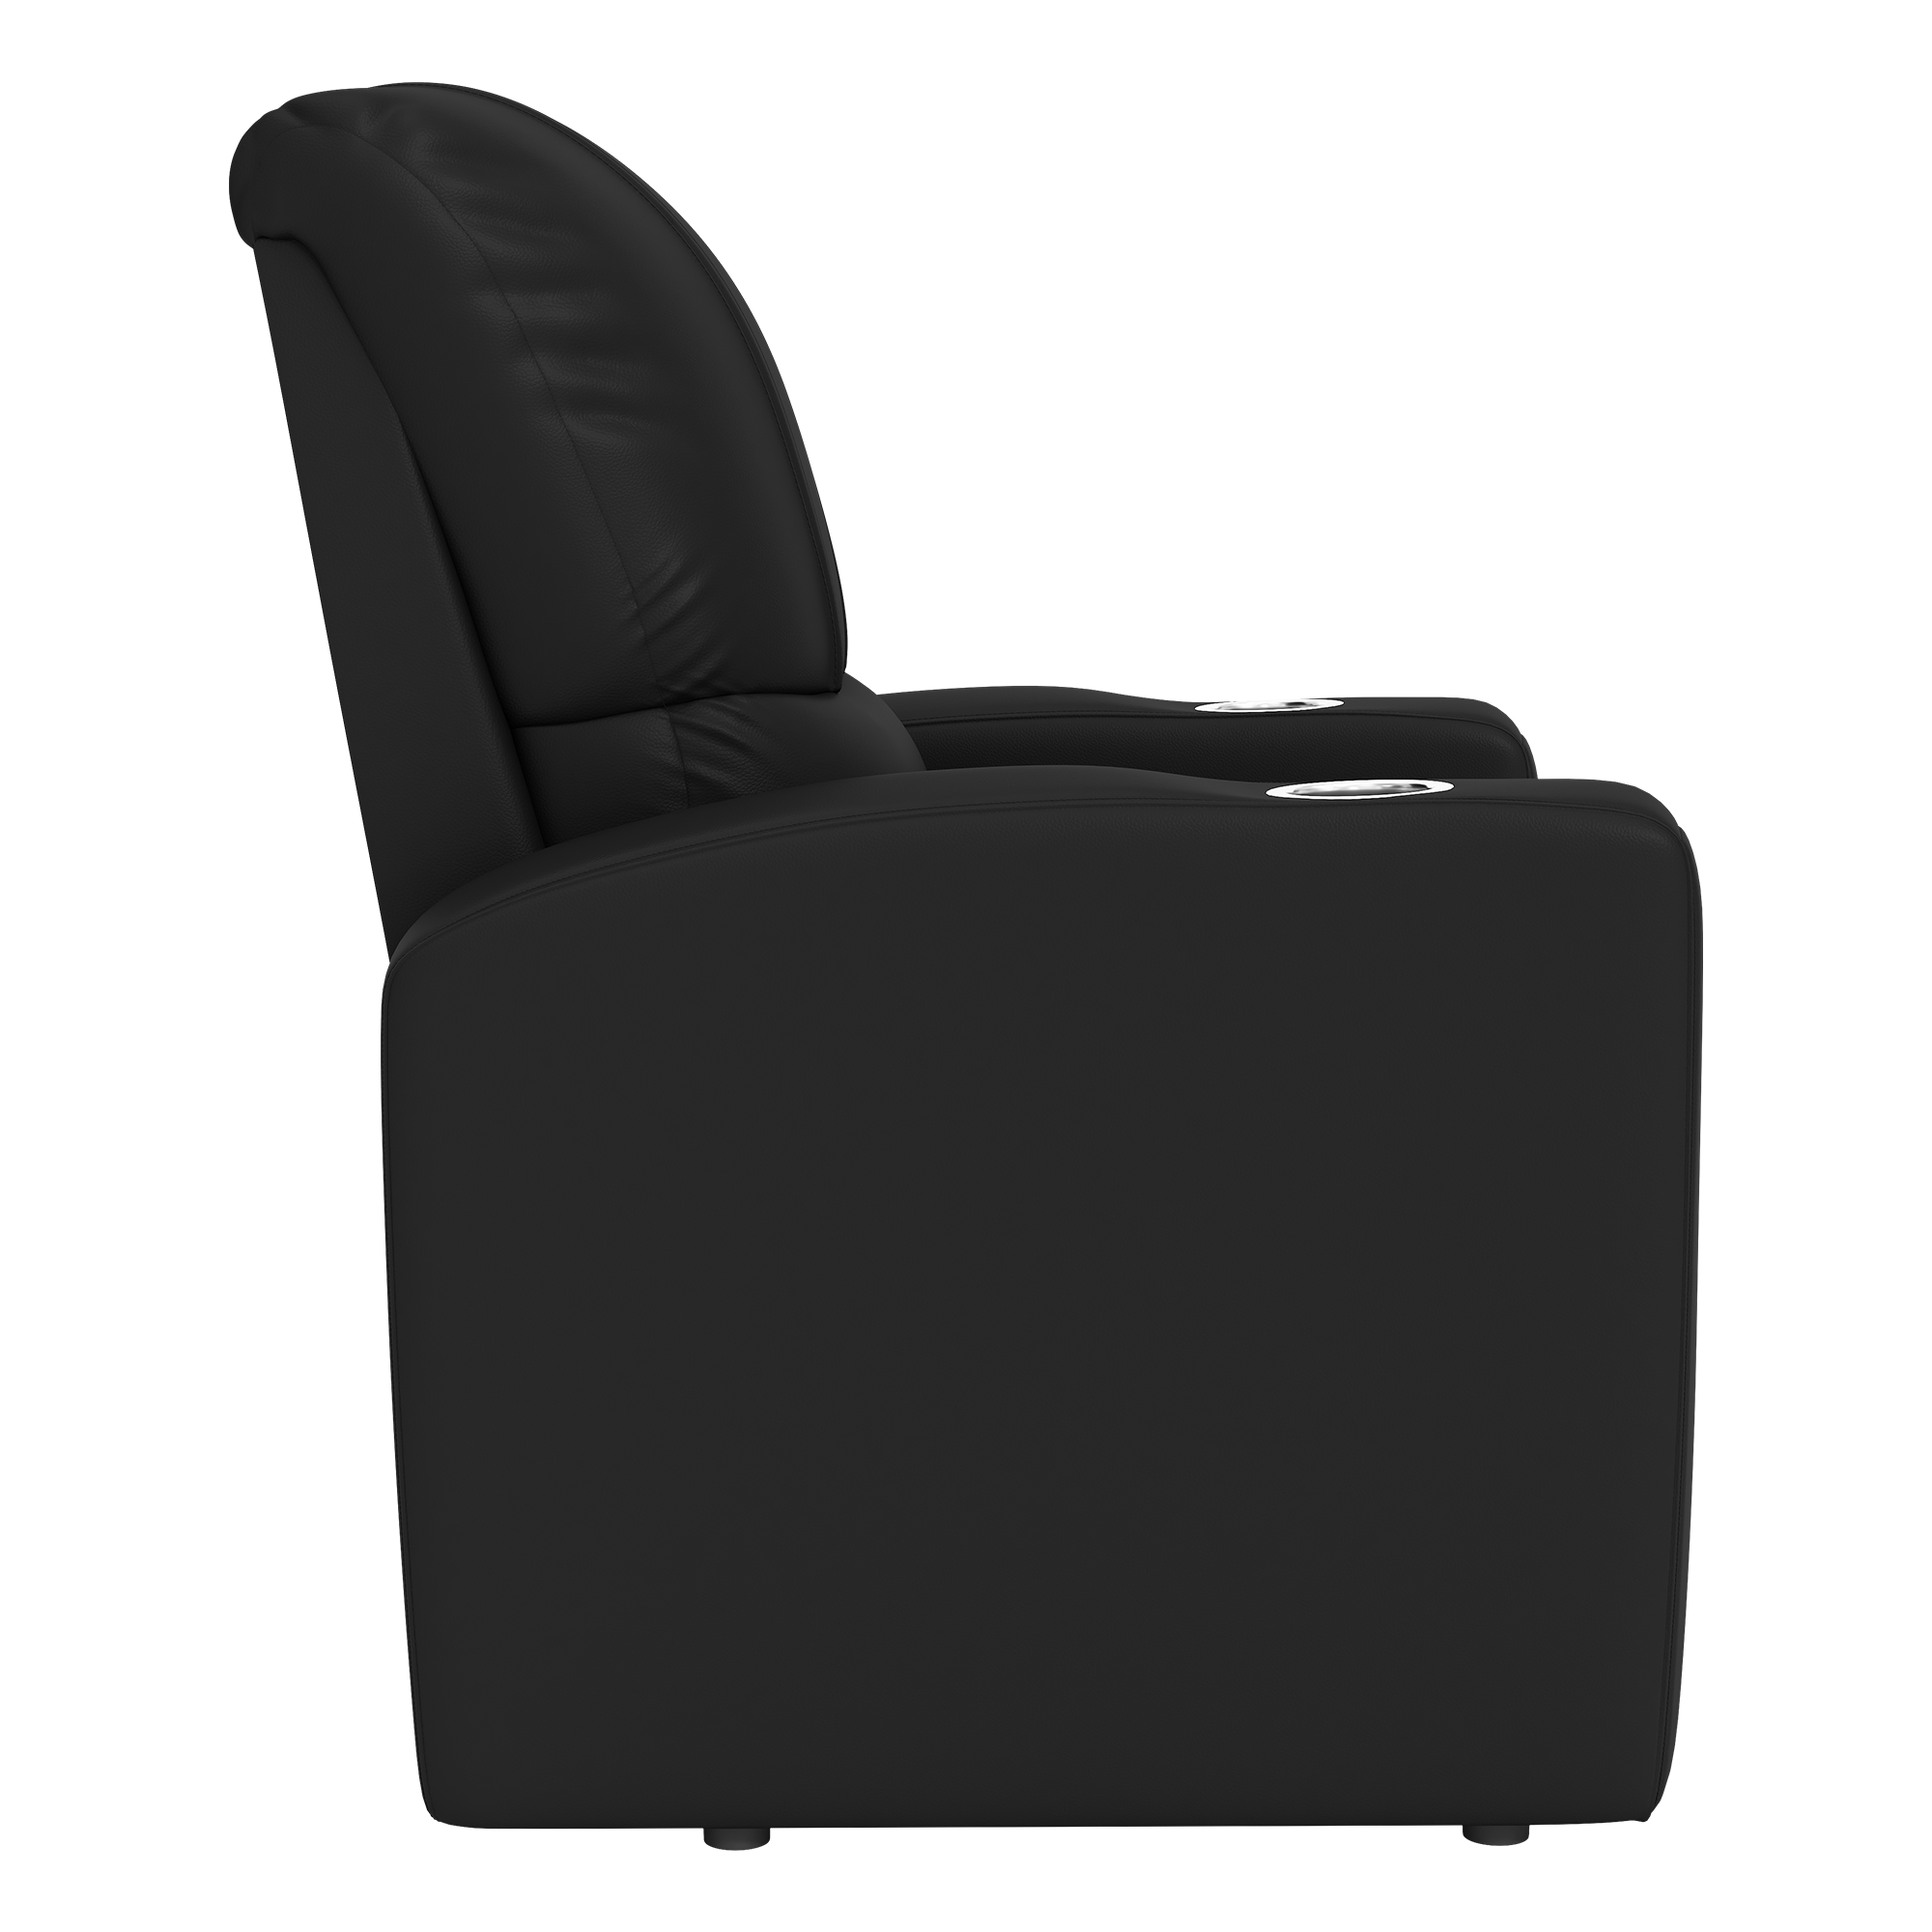 Stealth Recliner with  Jacksonville Jaguars Primary Logo